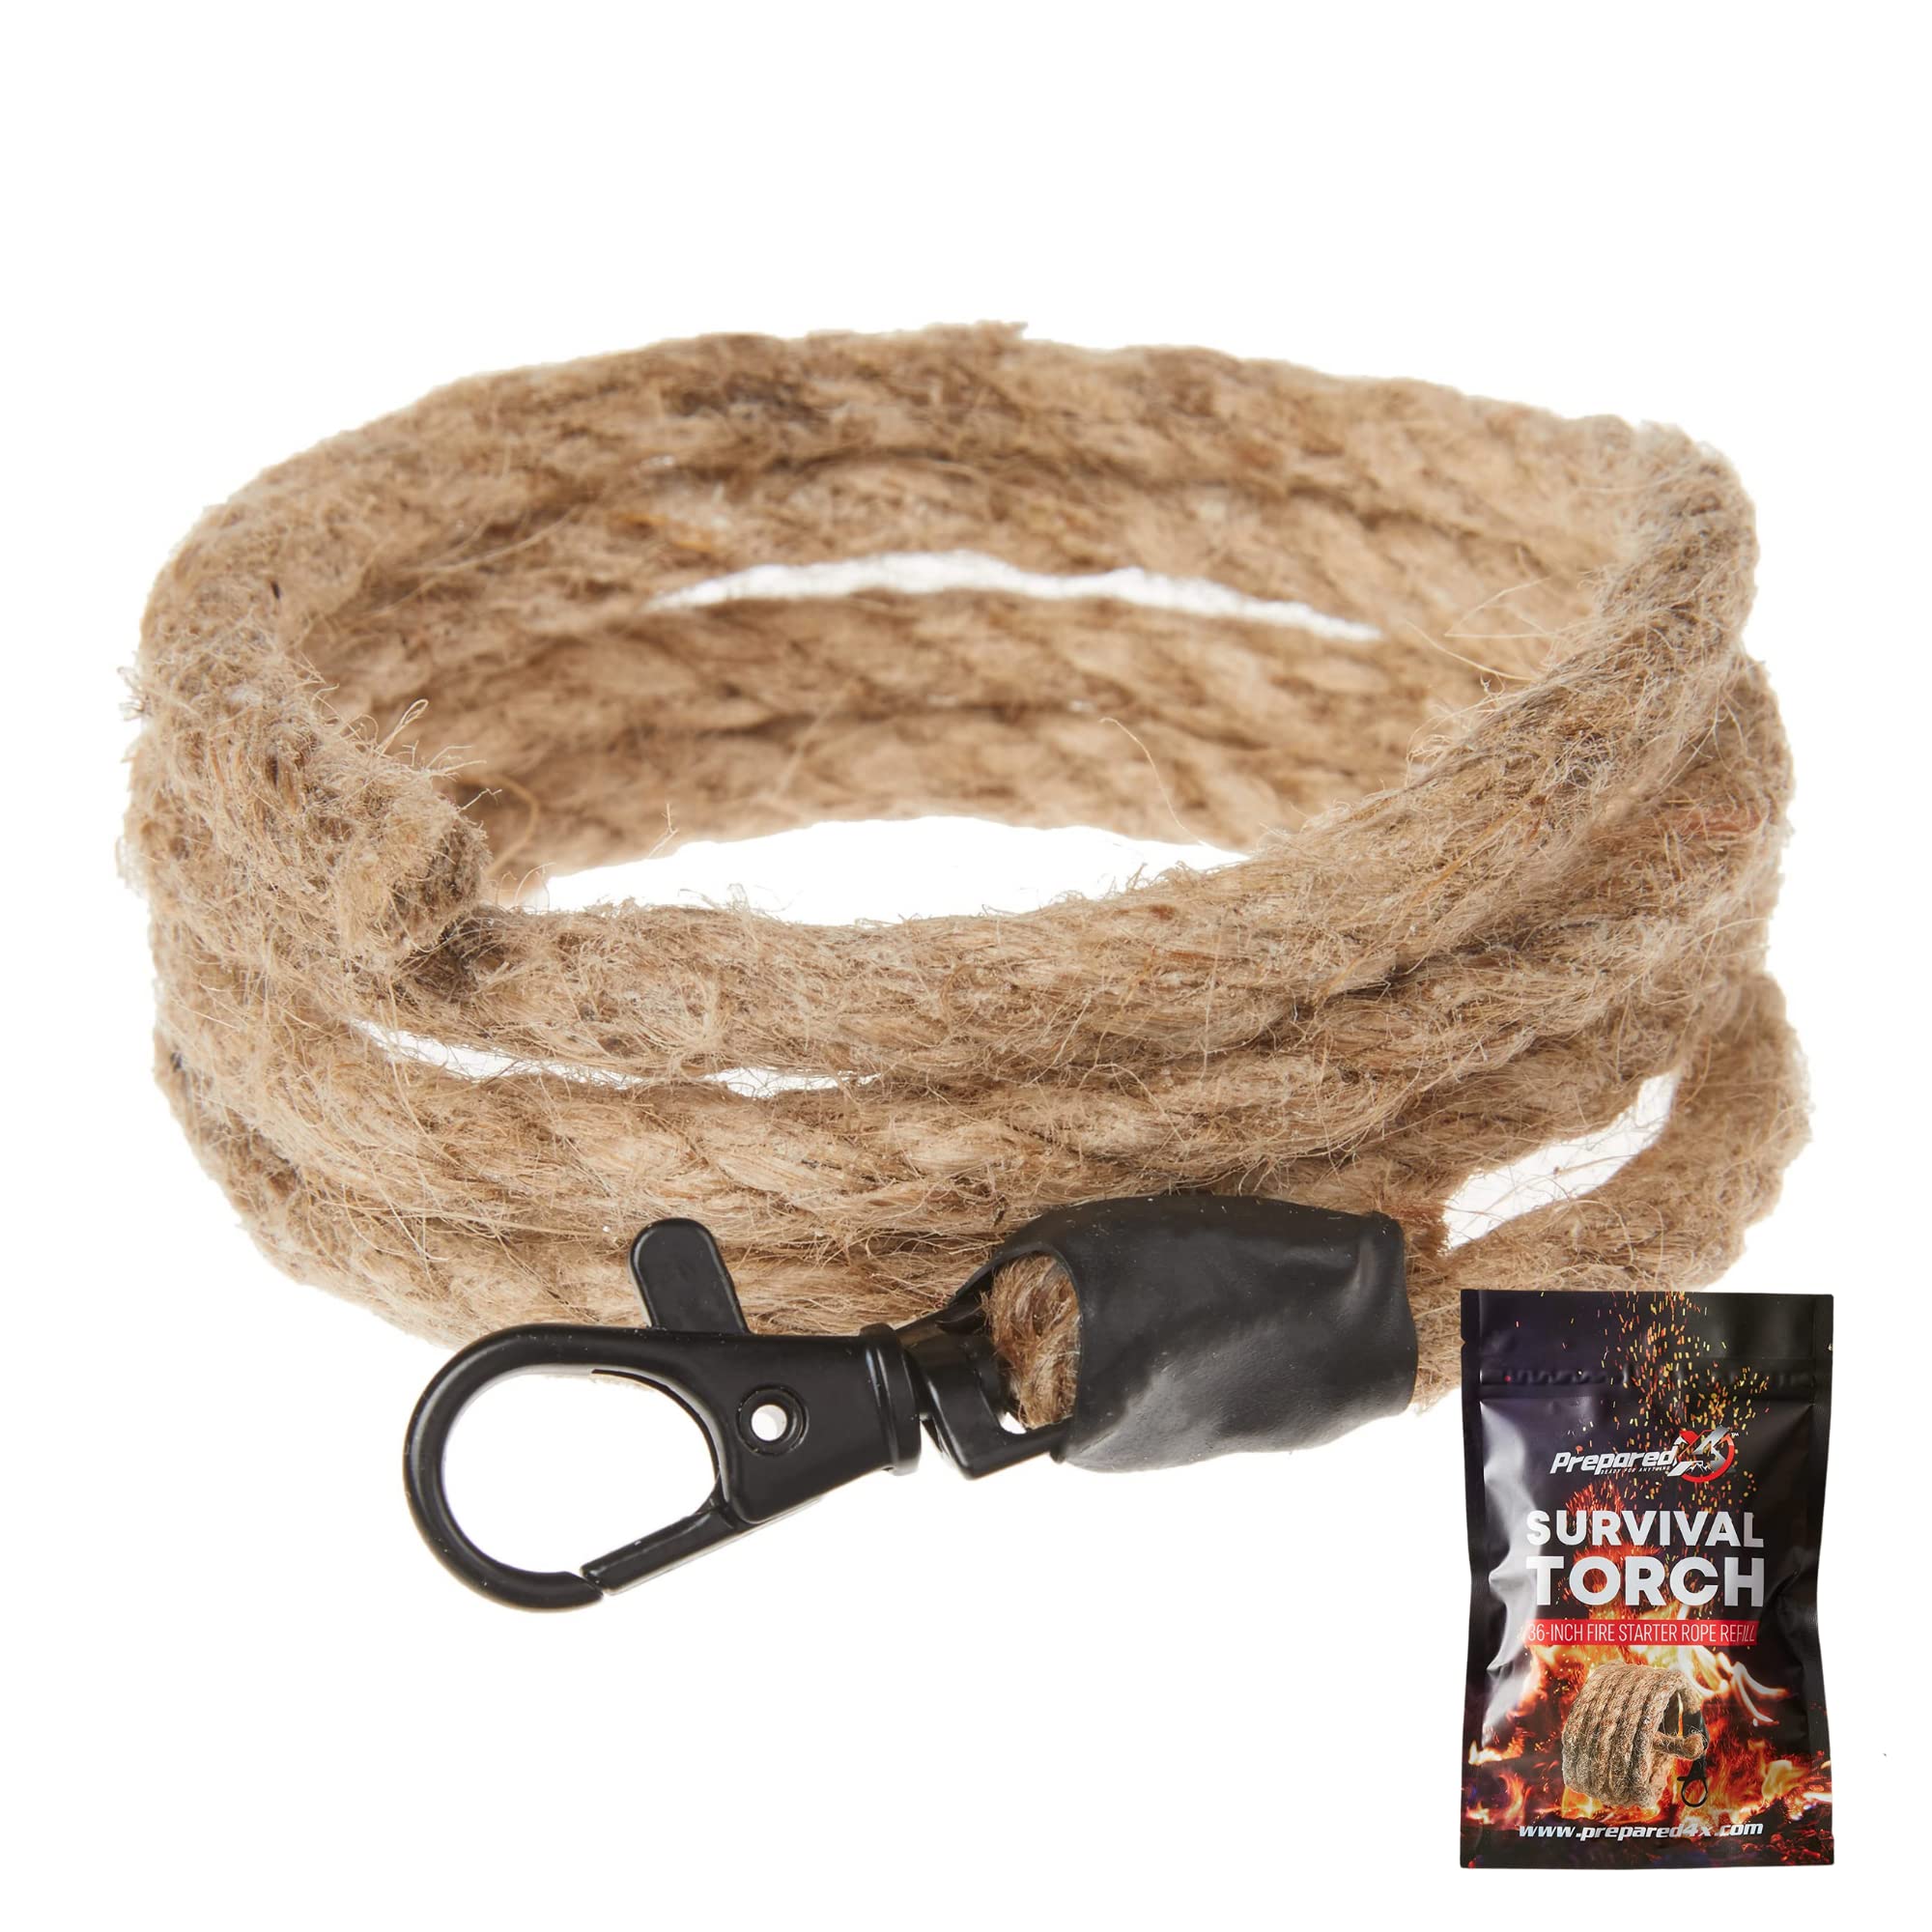 PREPARED4X Fire Starter Rope 36 Waterproof, Wax-Infused Hemp Tinder Wick  Refill Fire Tinder for Emergency Kit, Survival Kits, Survival Tools